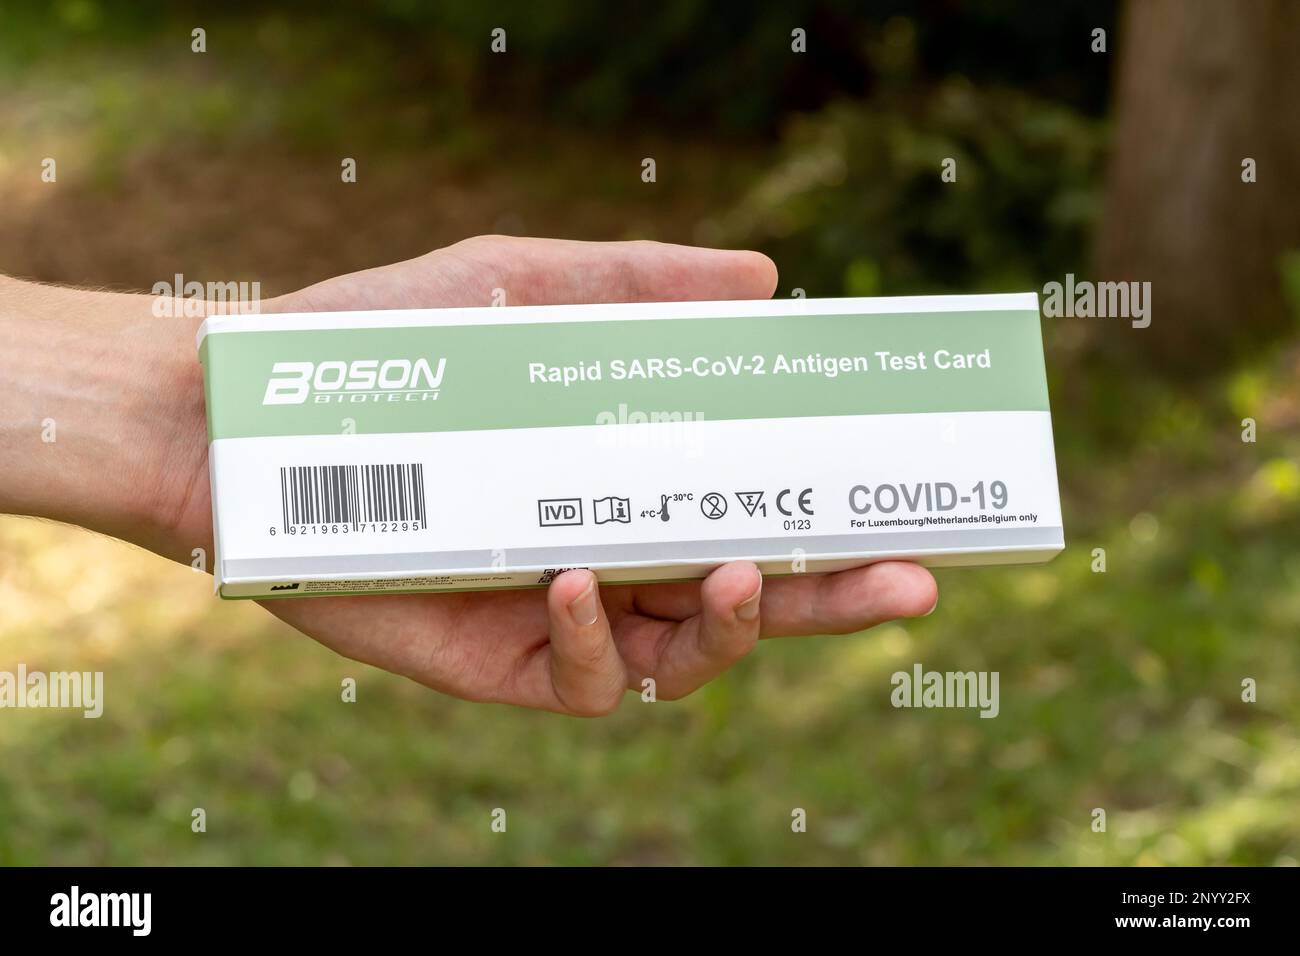 Boson Biotech Rapid SARS-Cov-2 Antigen Test Card COVID-19 coronavirus test package box held in hand full front view object closeup, one person Man, ha Stock Photo